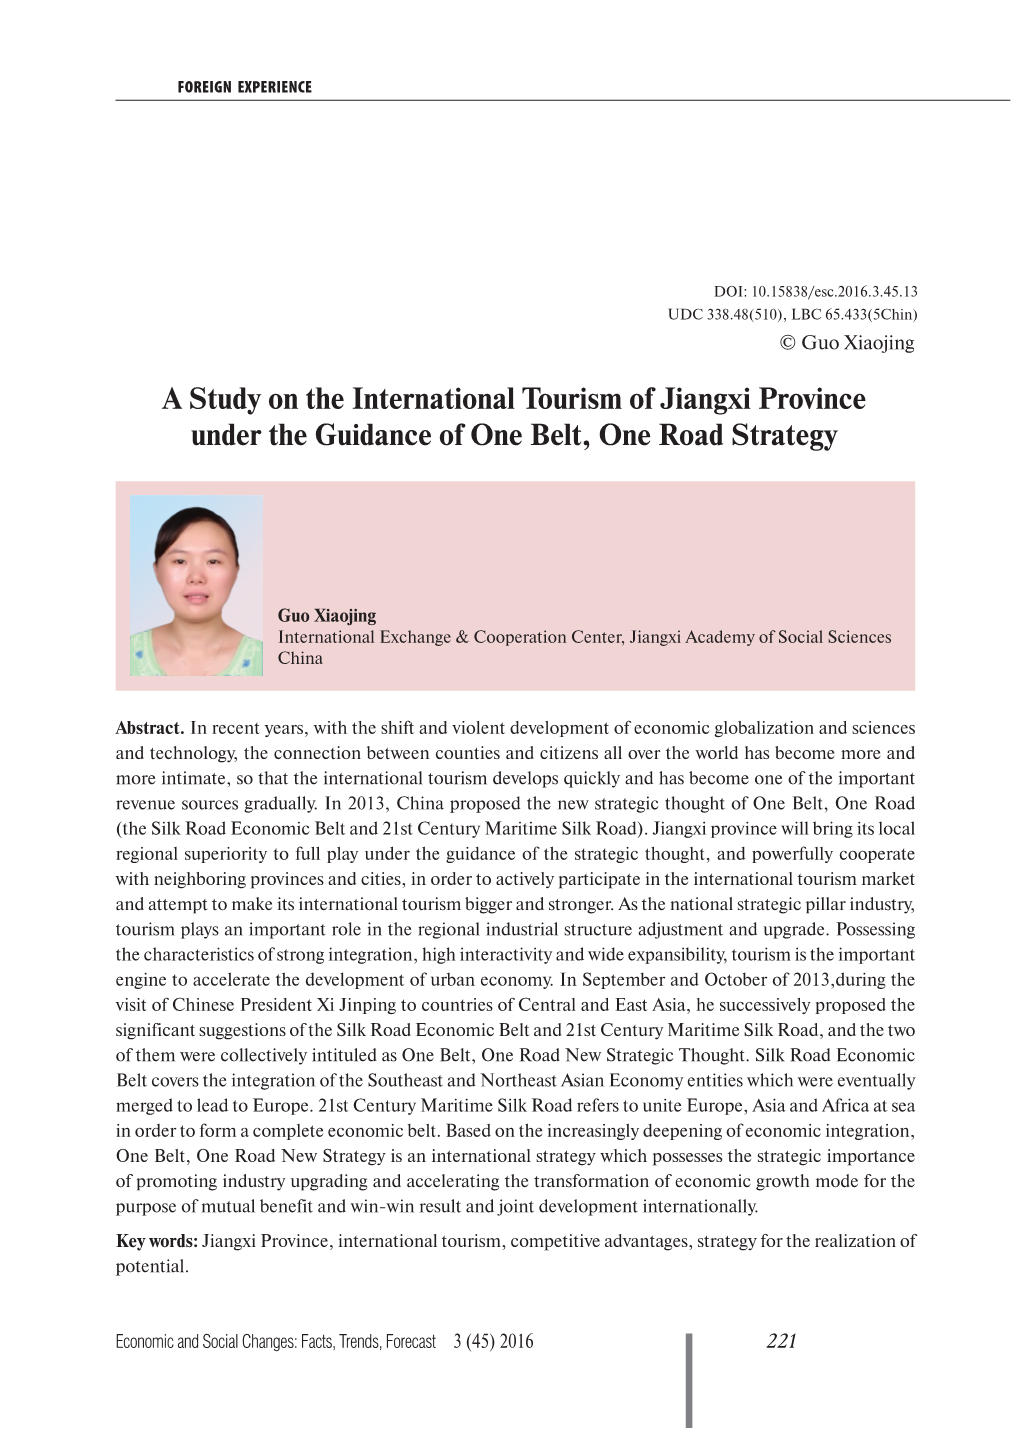 A Study on the International Tourism of Jiangxi Province Under the Guidance of One Belt, One Road Strategy